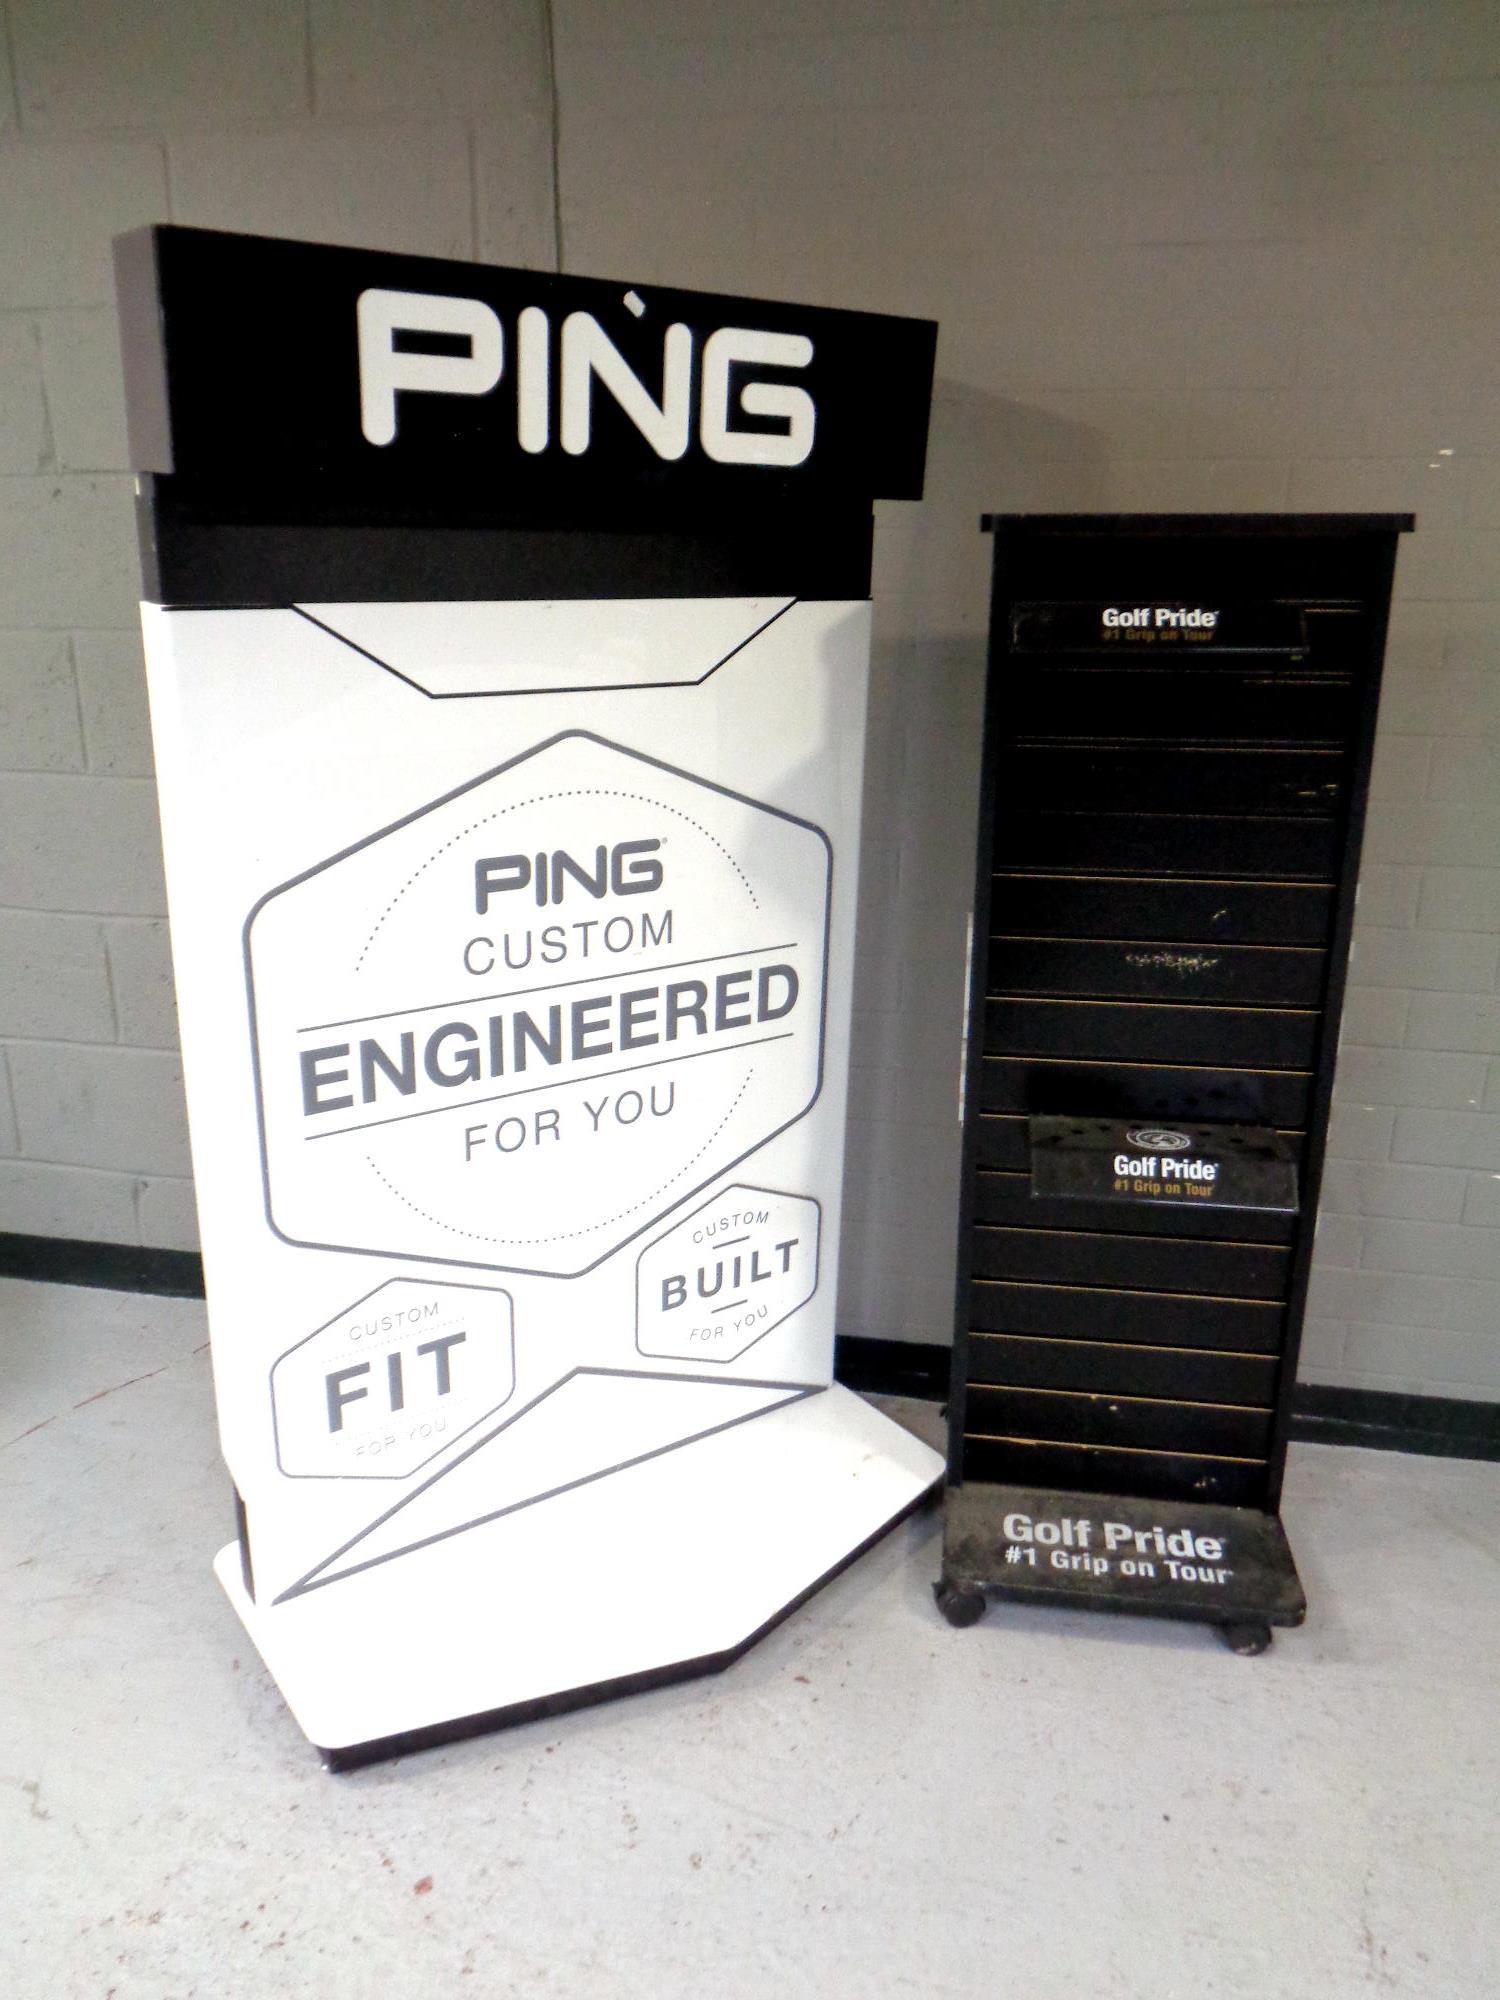 Two golf shop display stands Ping and Golf Pride